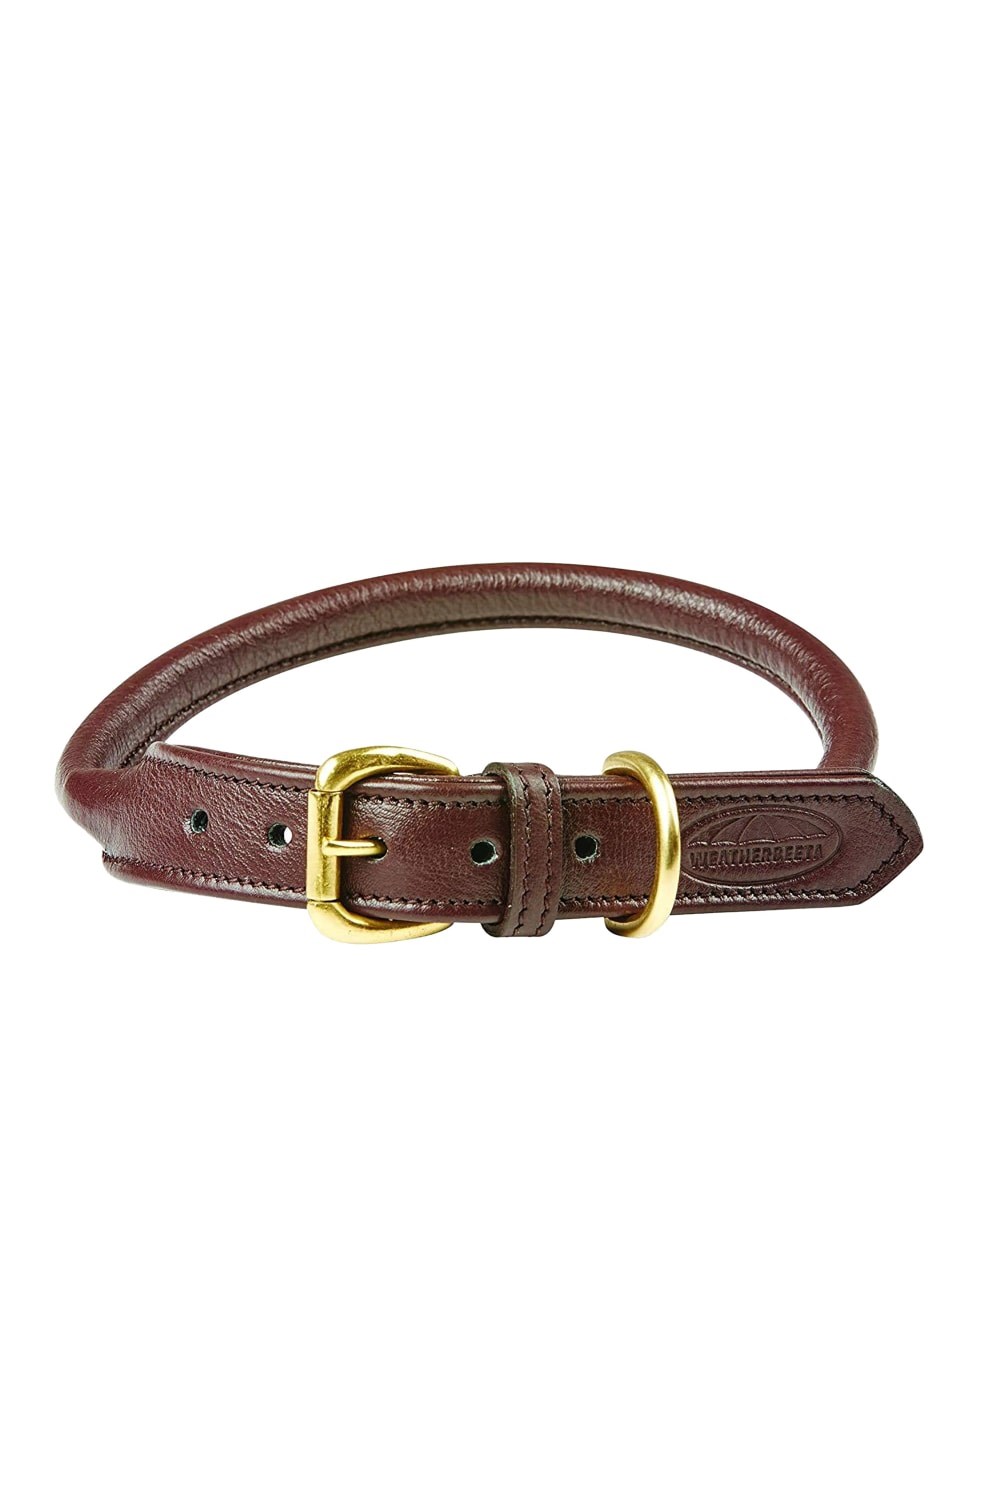 Rolled Leather Dog Collar -